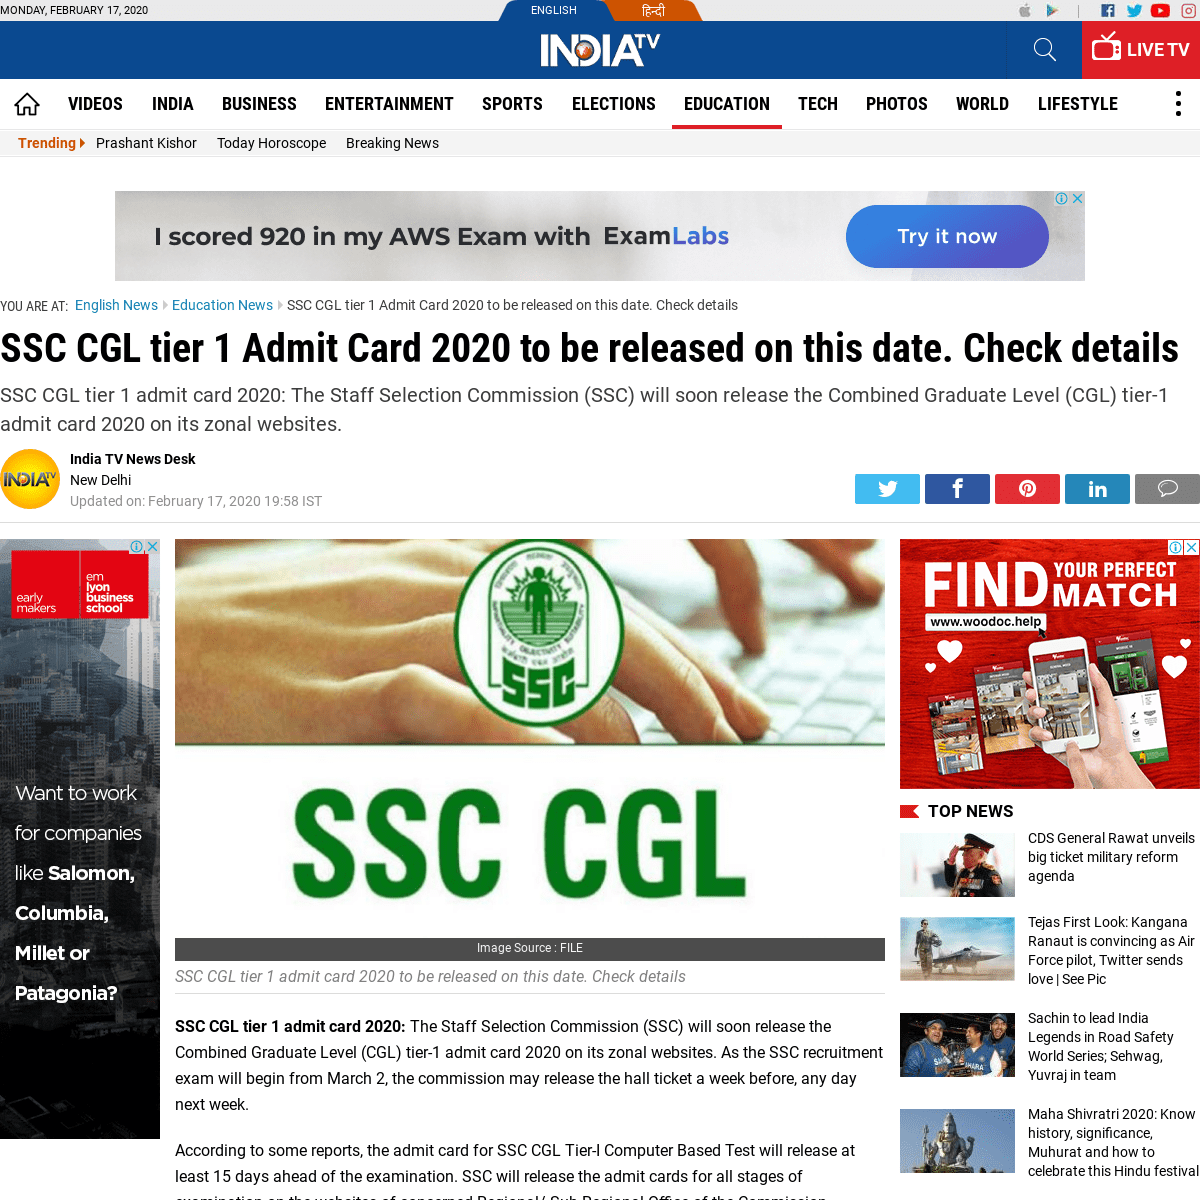 A complete backup of www.indiatvnews.com/education/news-ssc-cgl-tier-1-admit-card-2020-release-date-exam-pattern-details-589847